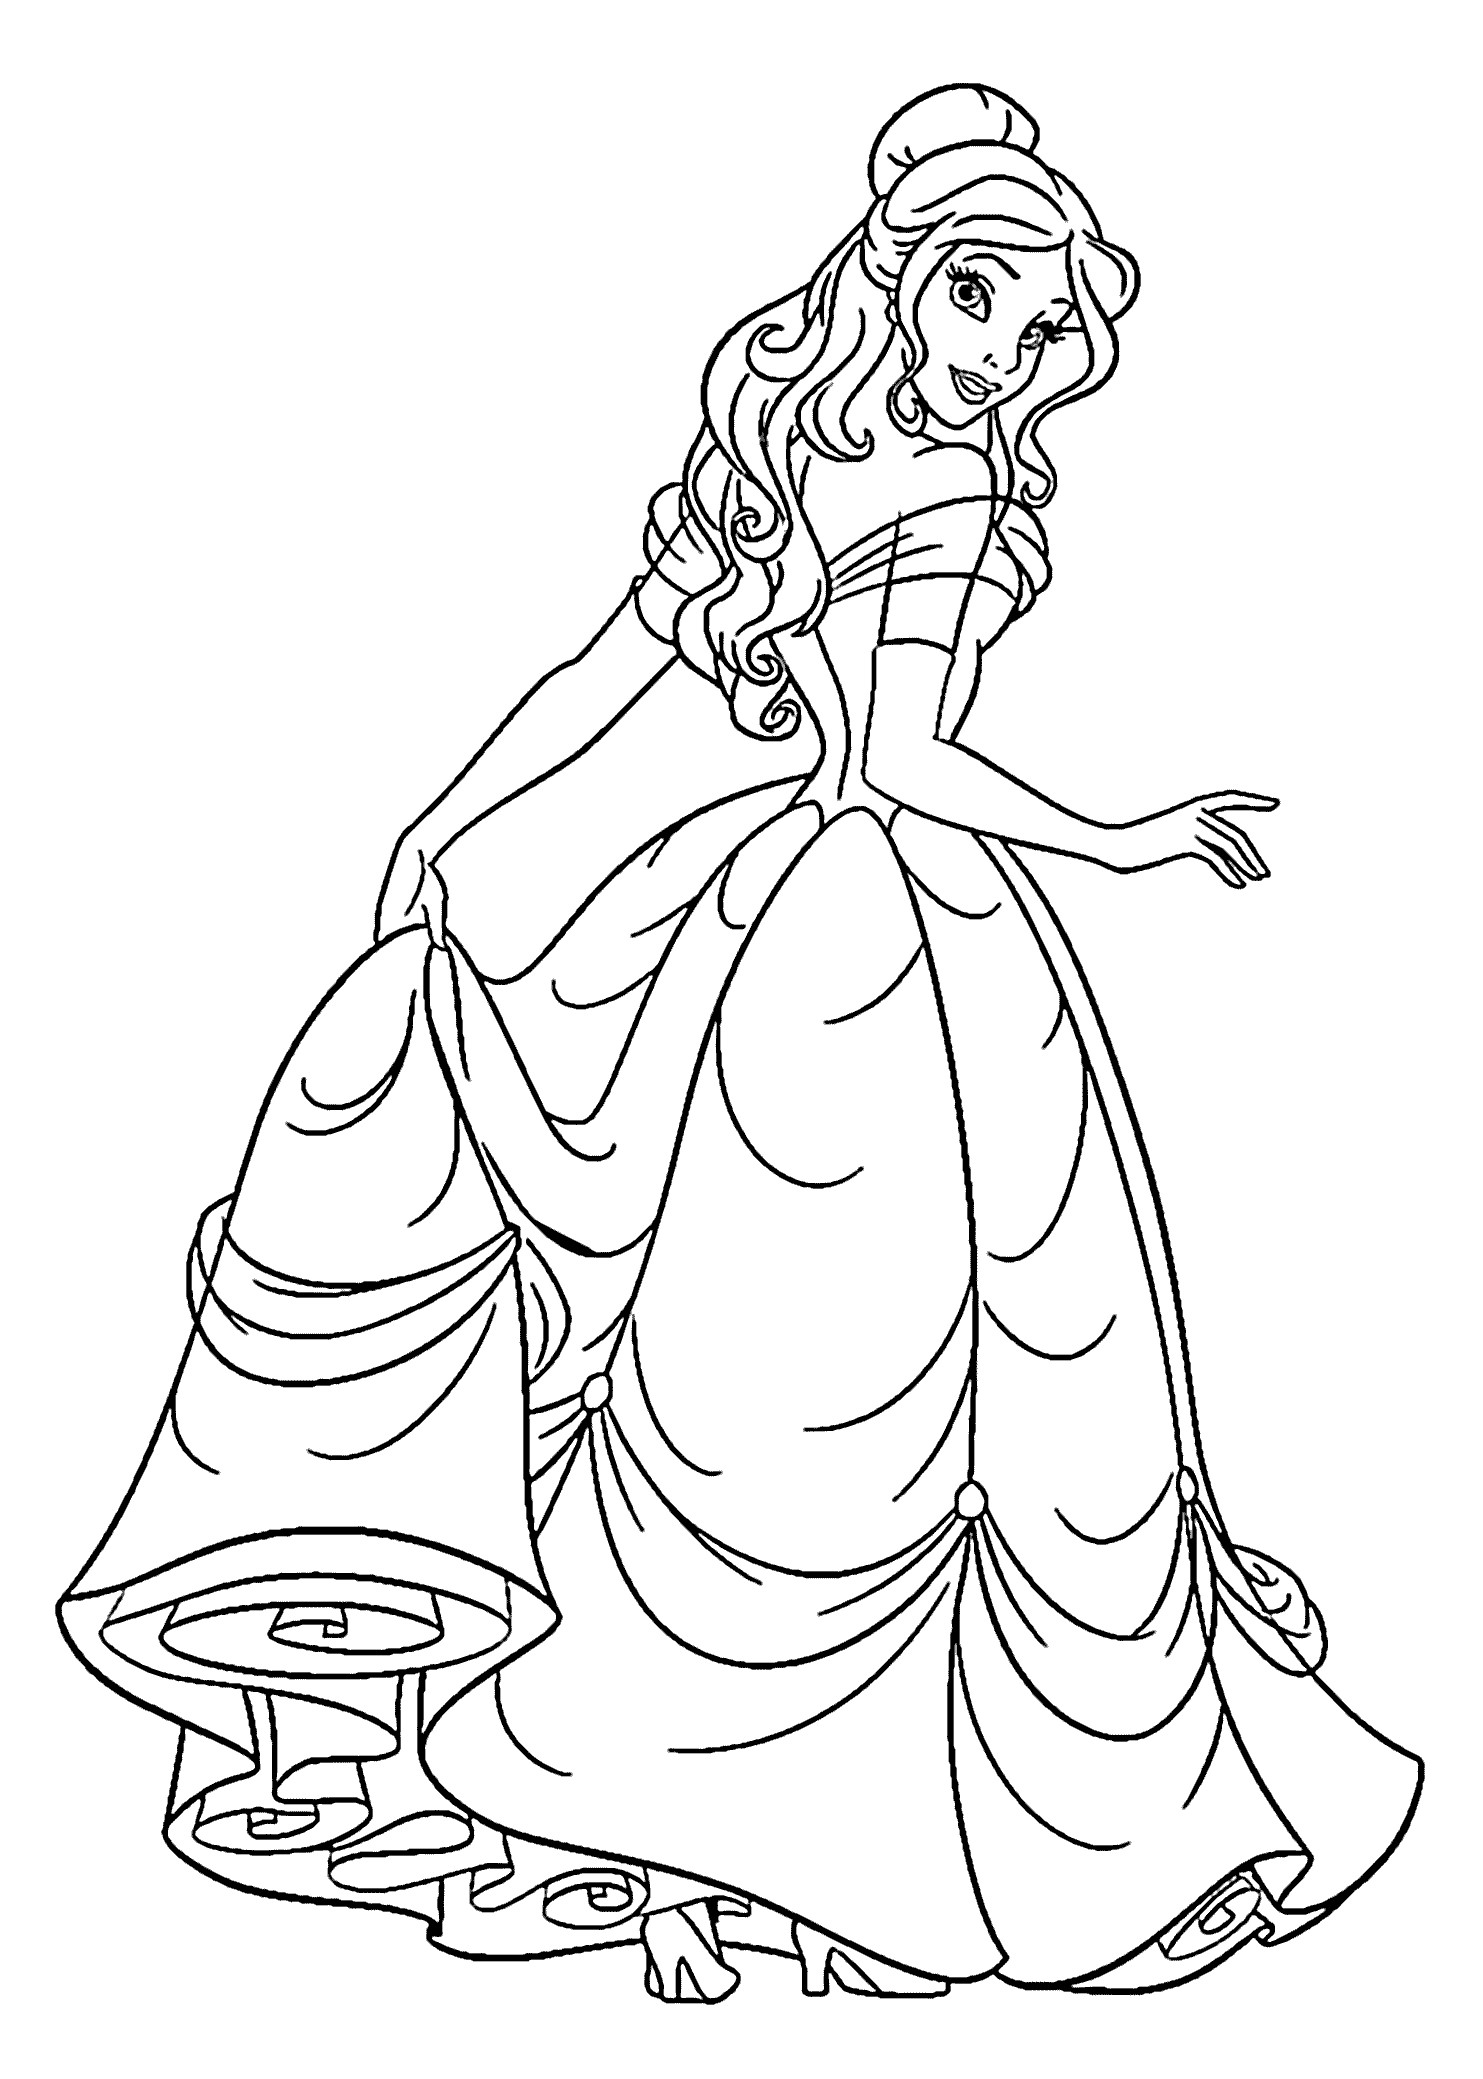 Beauty princess coloring pages for kids printable free